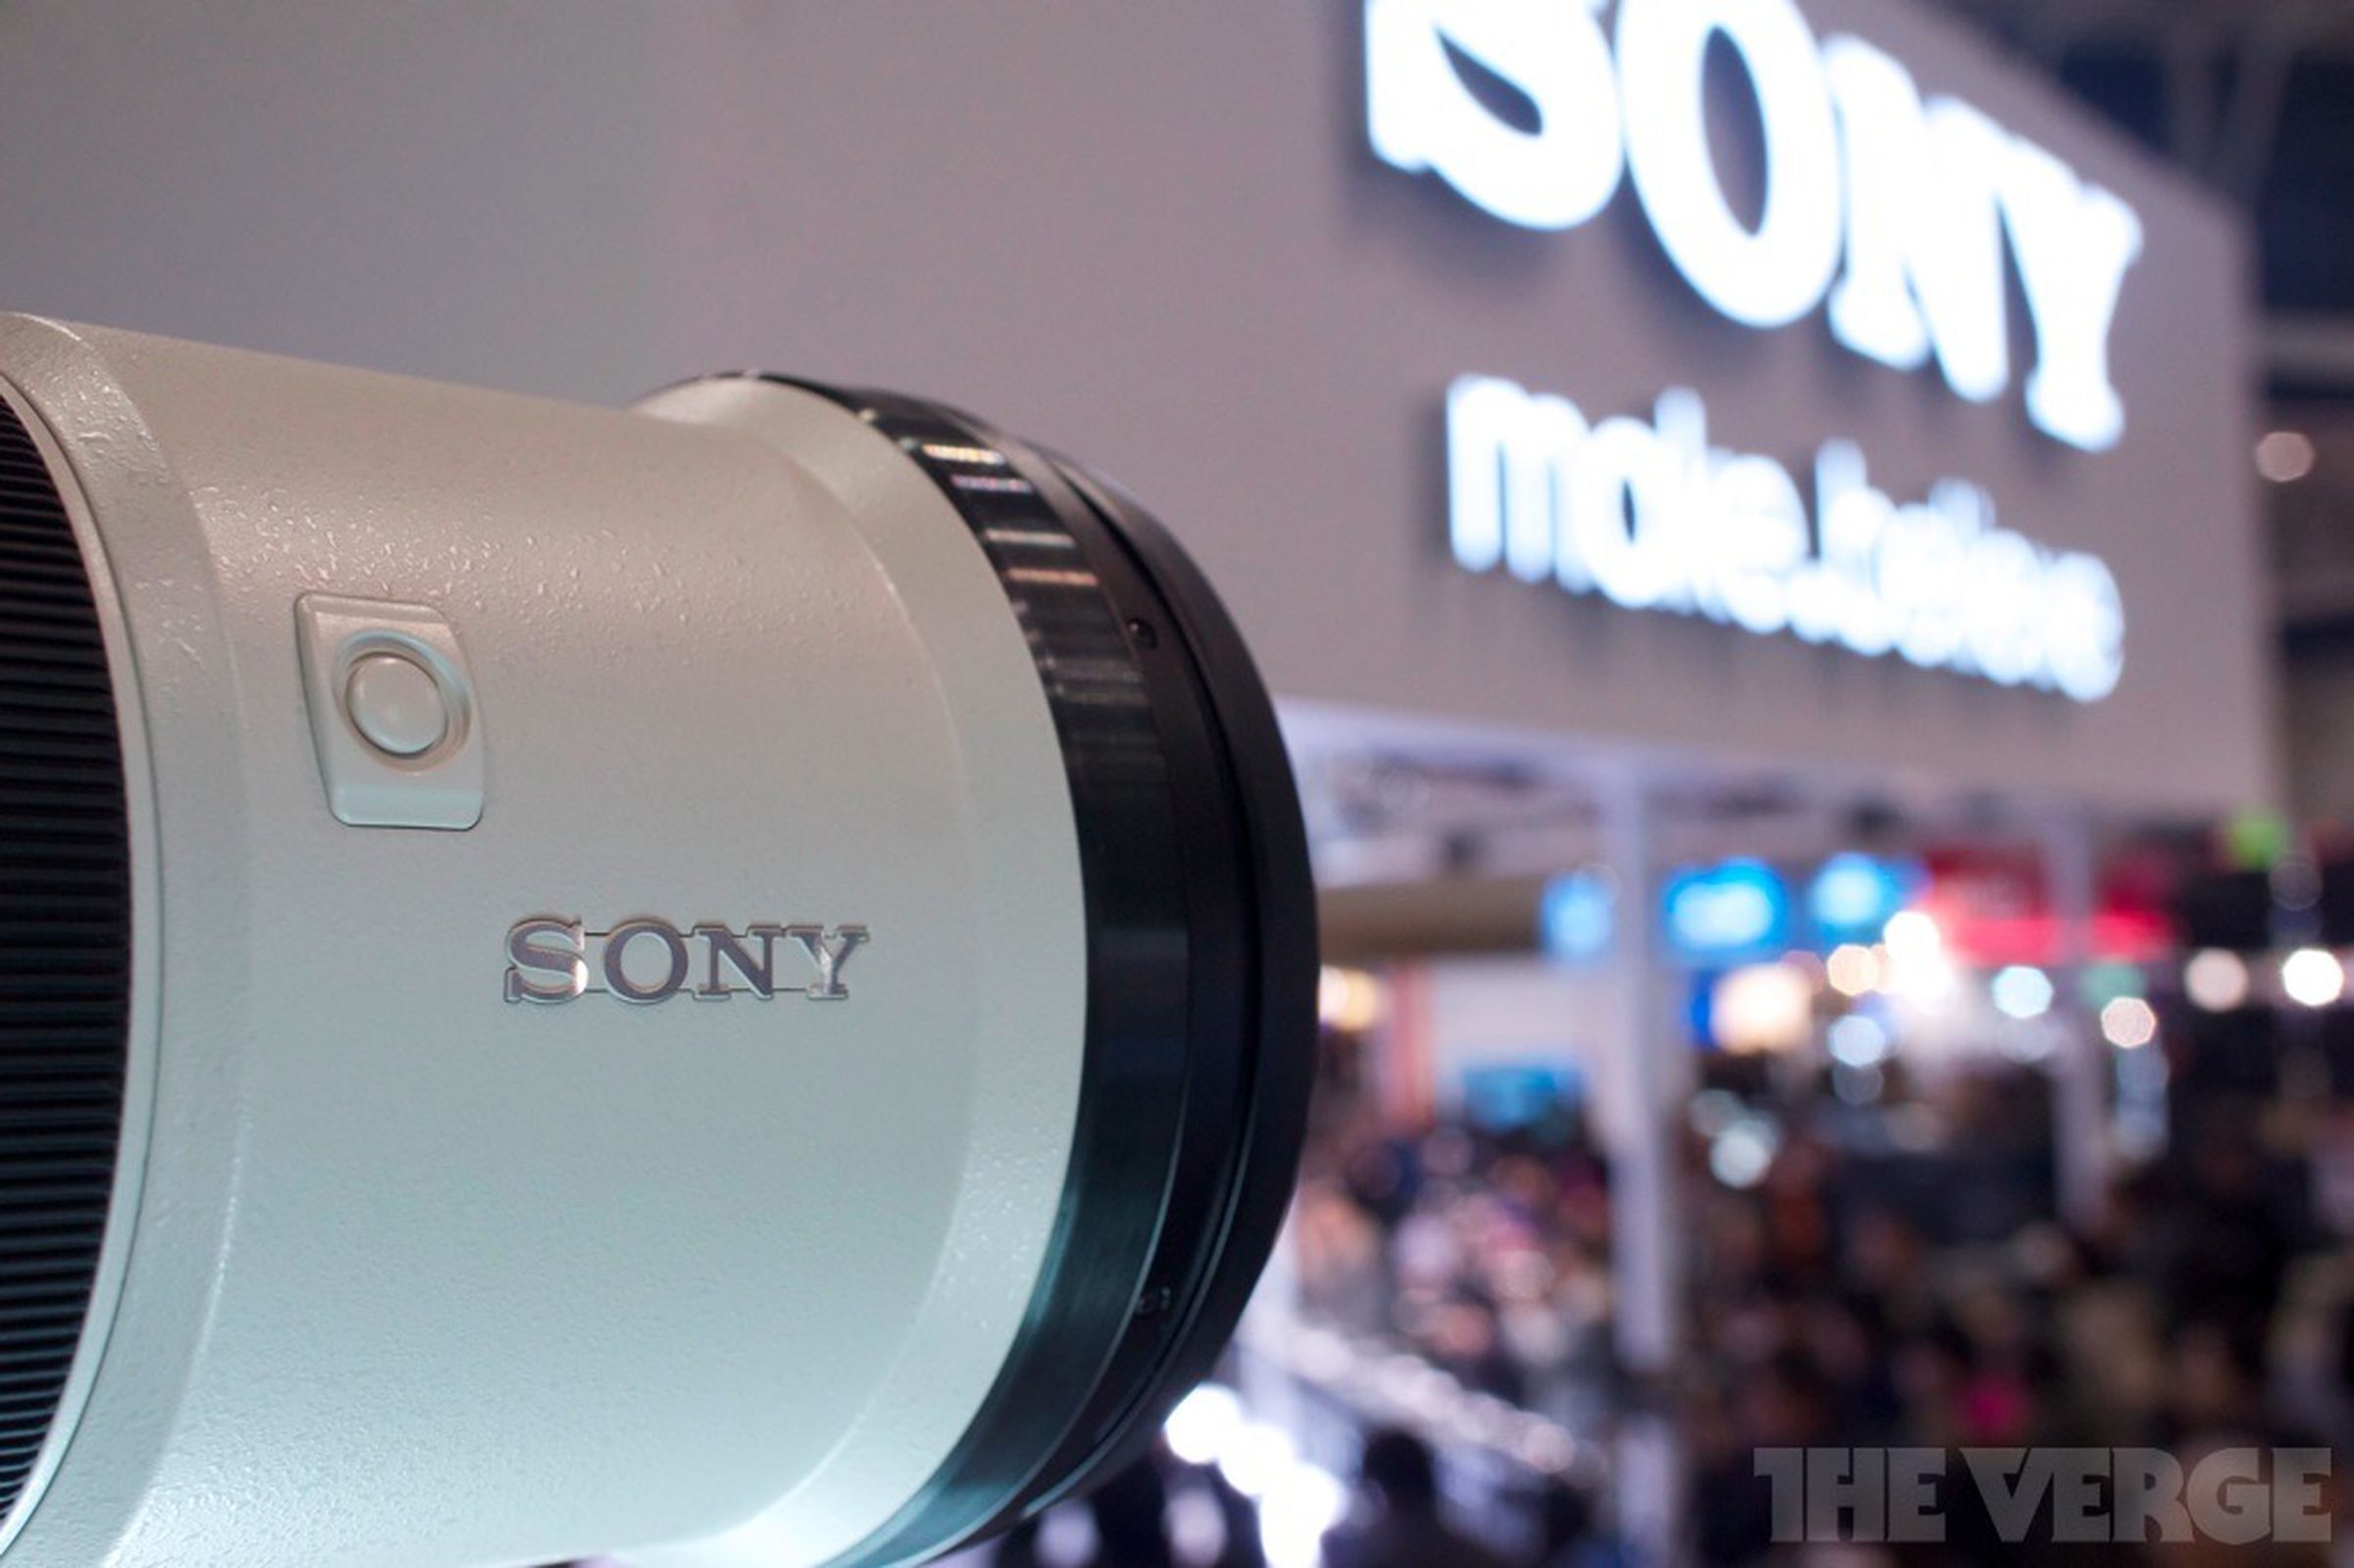 Sony 500mm f/4 G SSM lens hands-on pictures